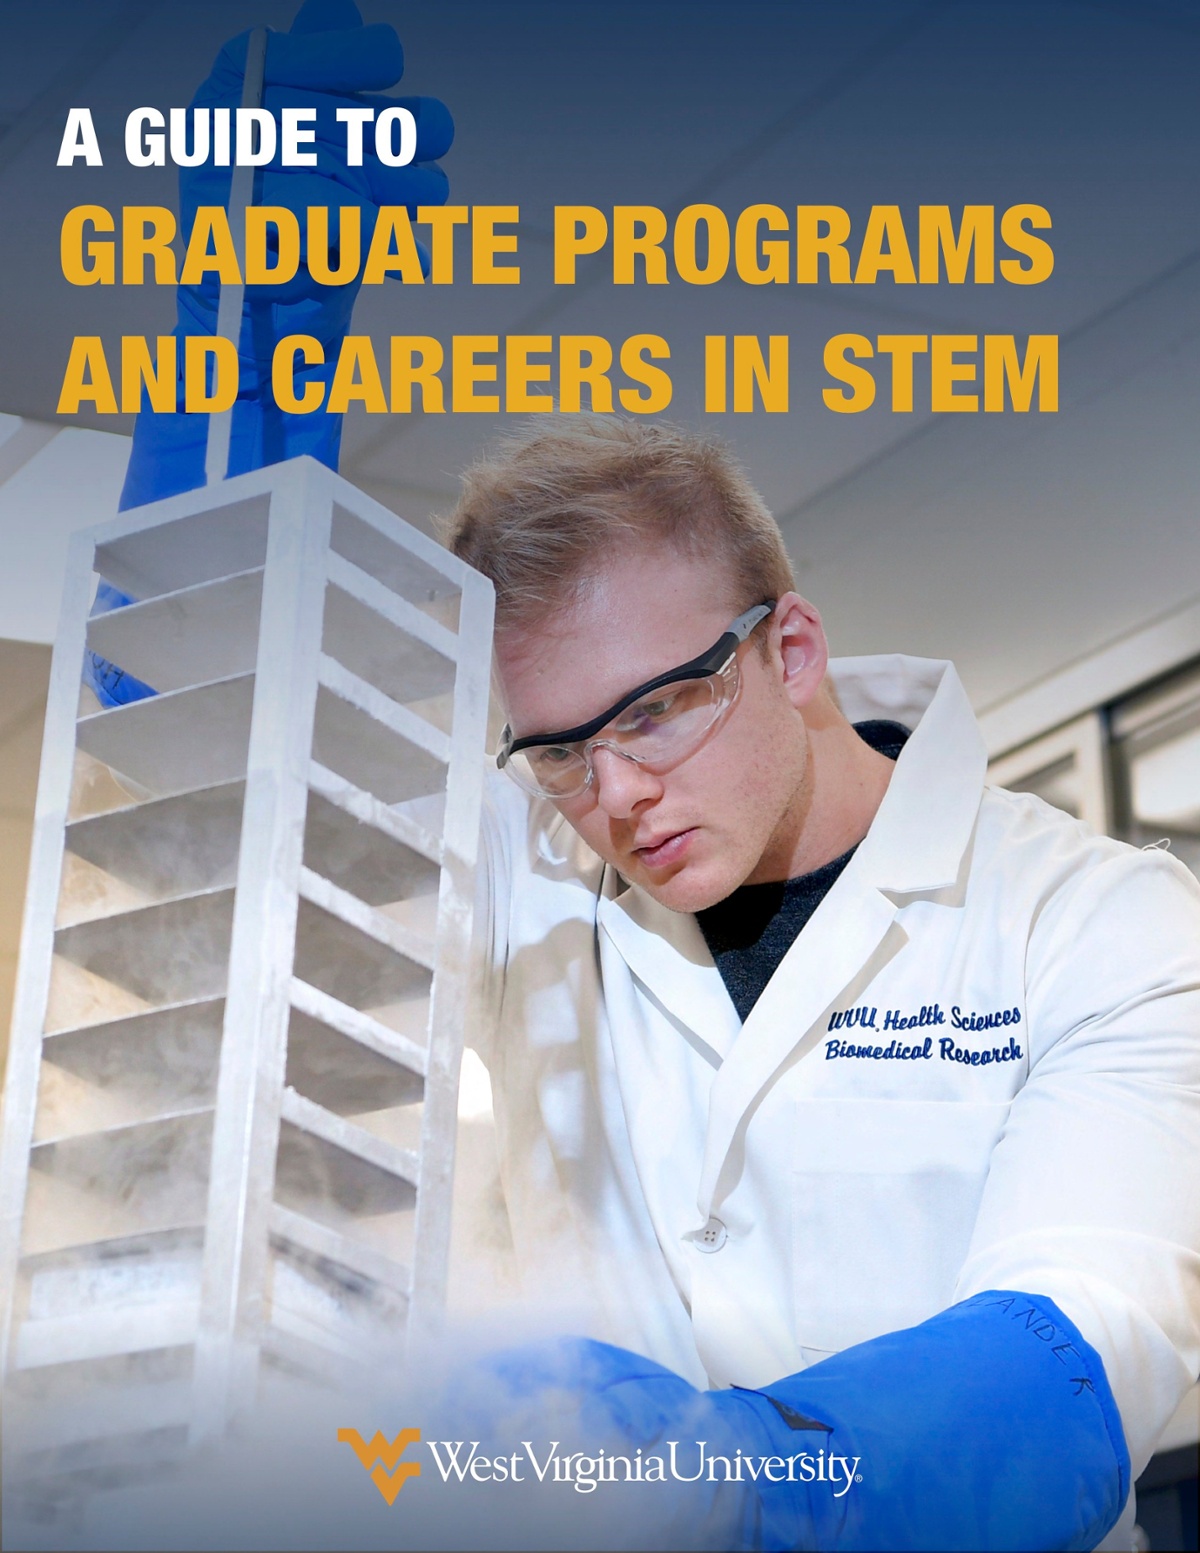 An e-book cover titled, “A Guide to Graduate Programs and Careers in STEM” and a male graduate student in a research lab.